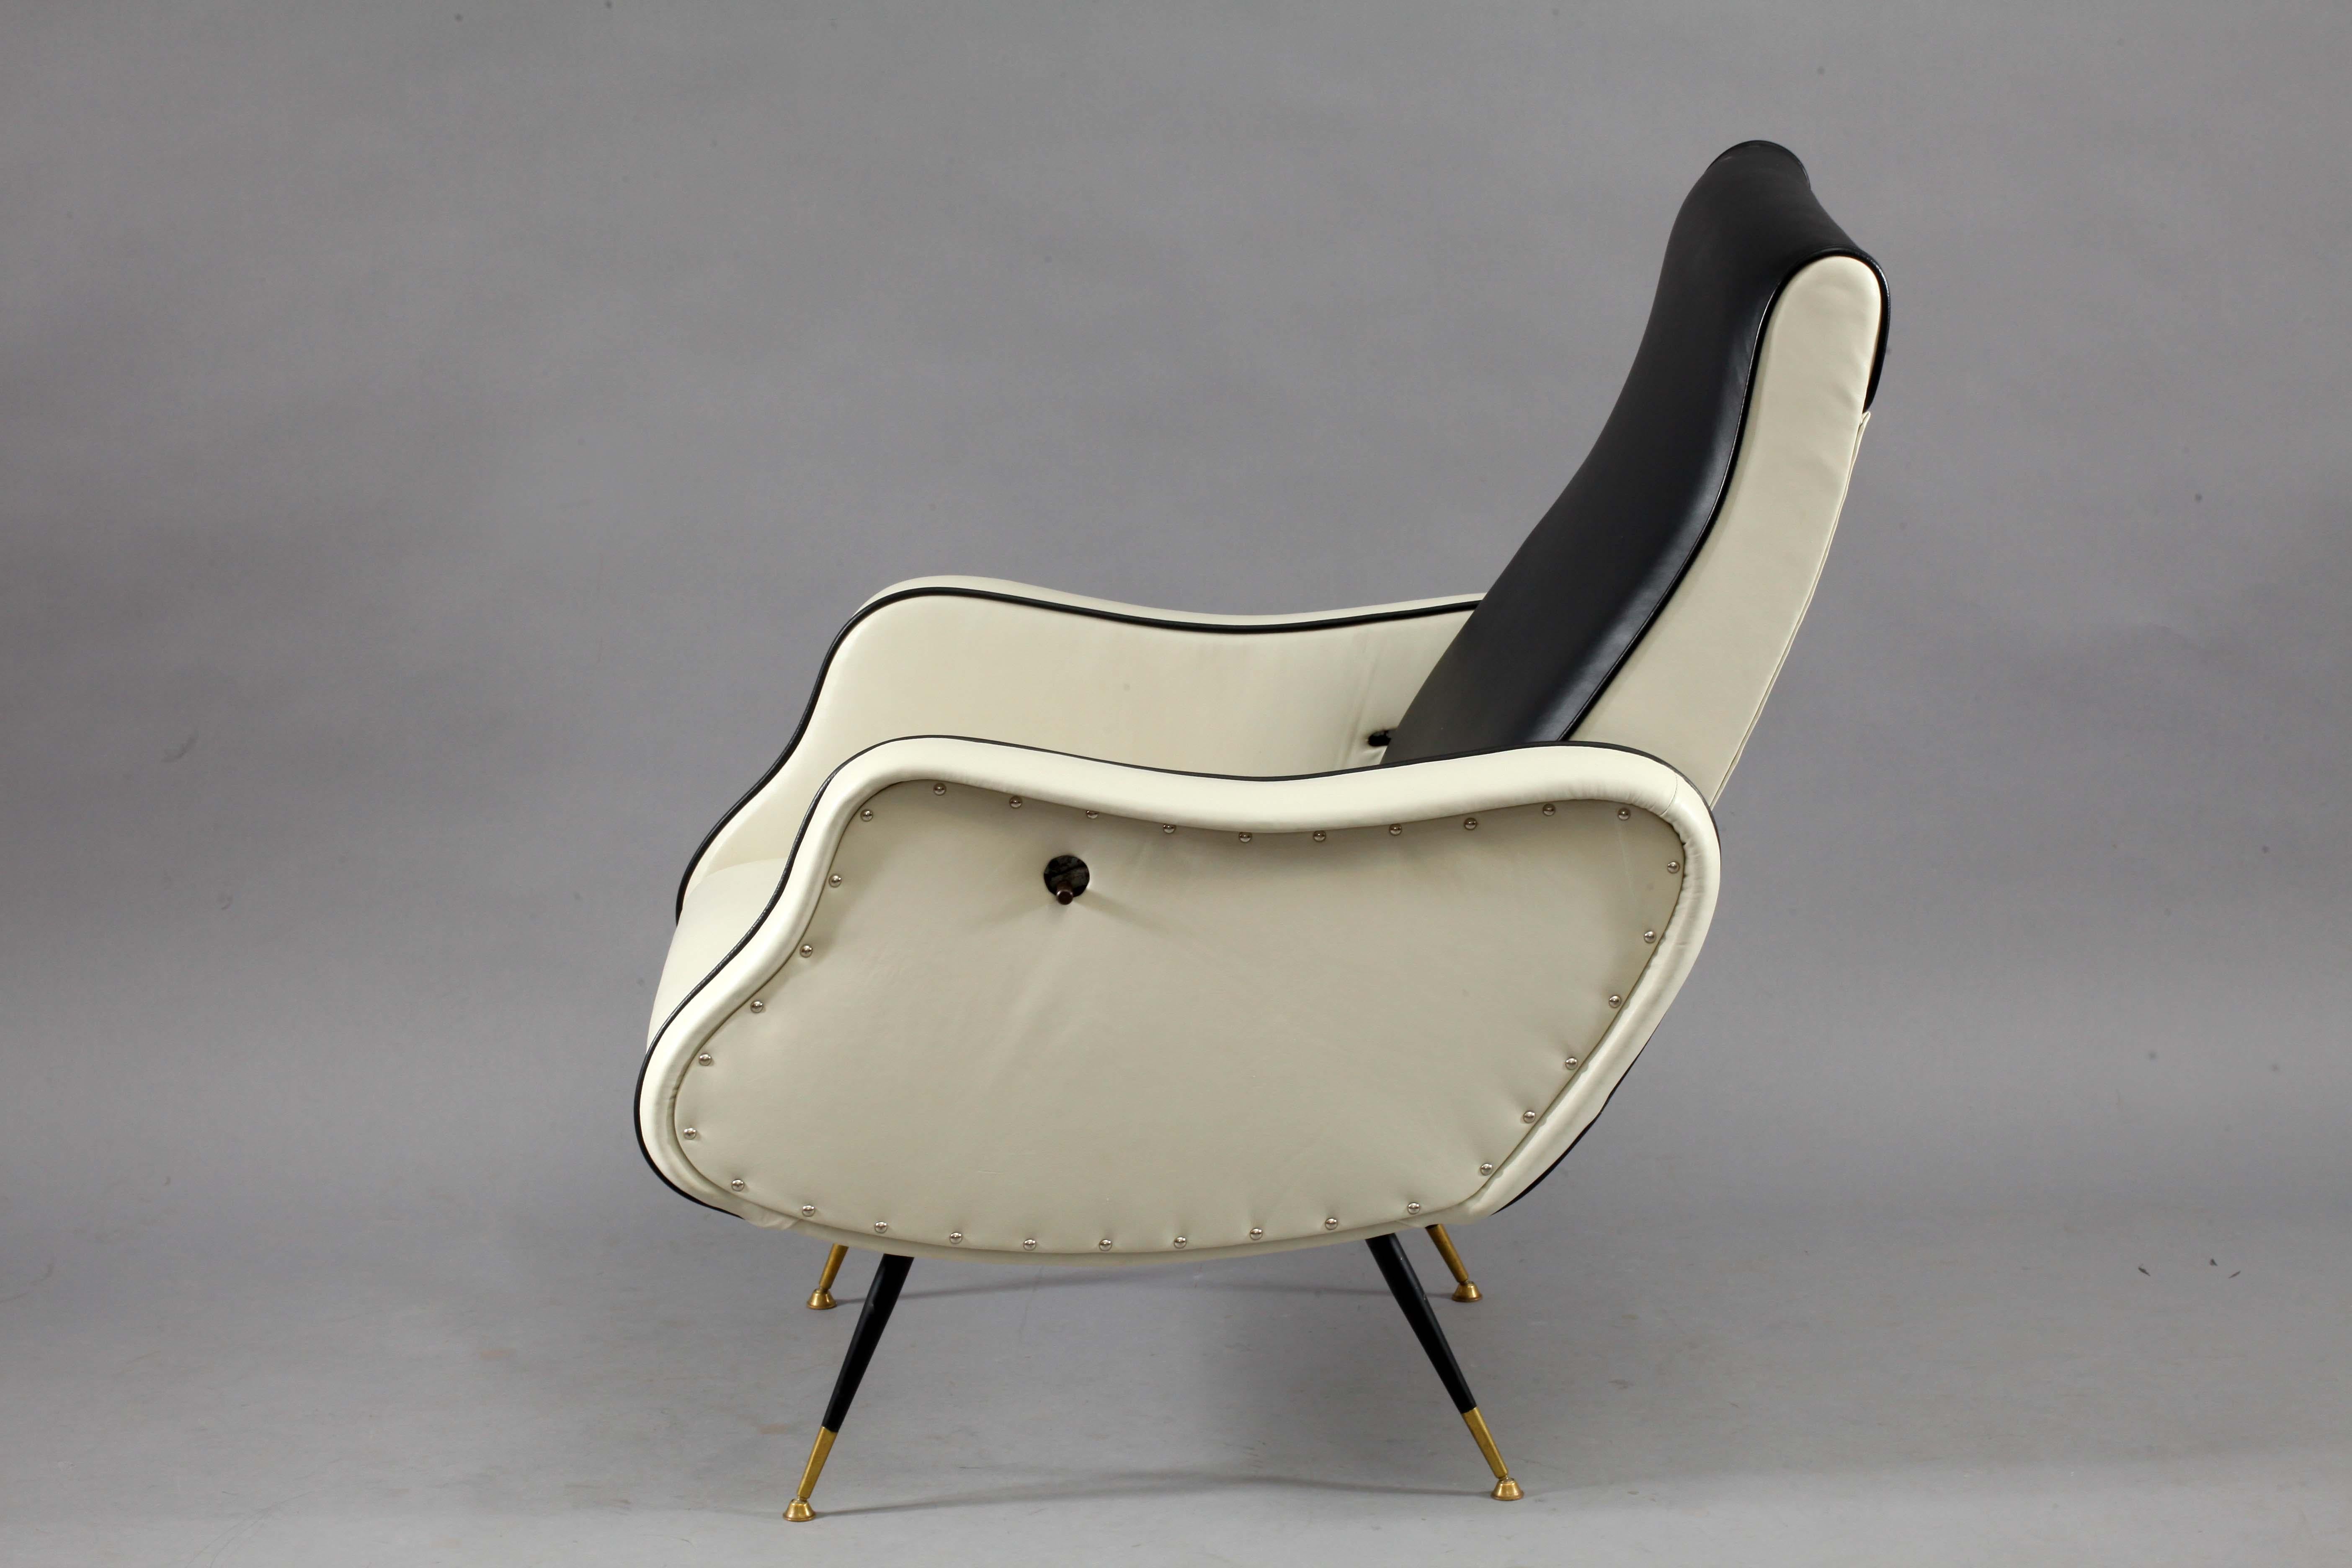 Adjustable Lounge chair,
modell Lady chair,
attributed to Marco Zanuso,
Italy, 1950.
Backrest adjustable in three positions,
leather, brass/black legs.
       